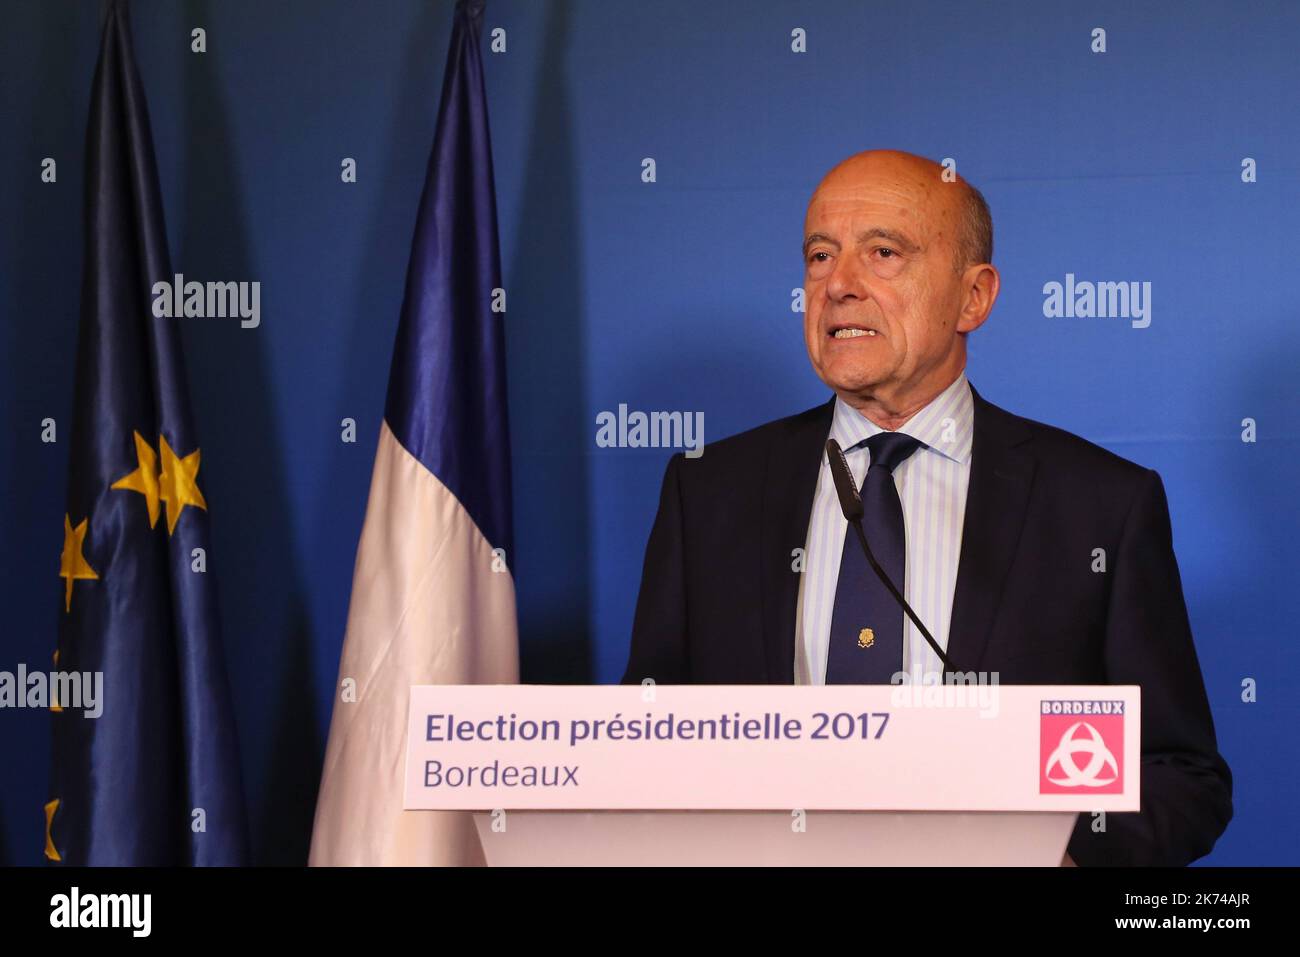 First round of the French presidential elections 2017 Alain Juppé delivers a speech   Stock Photo